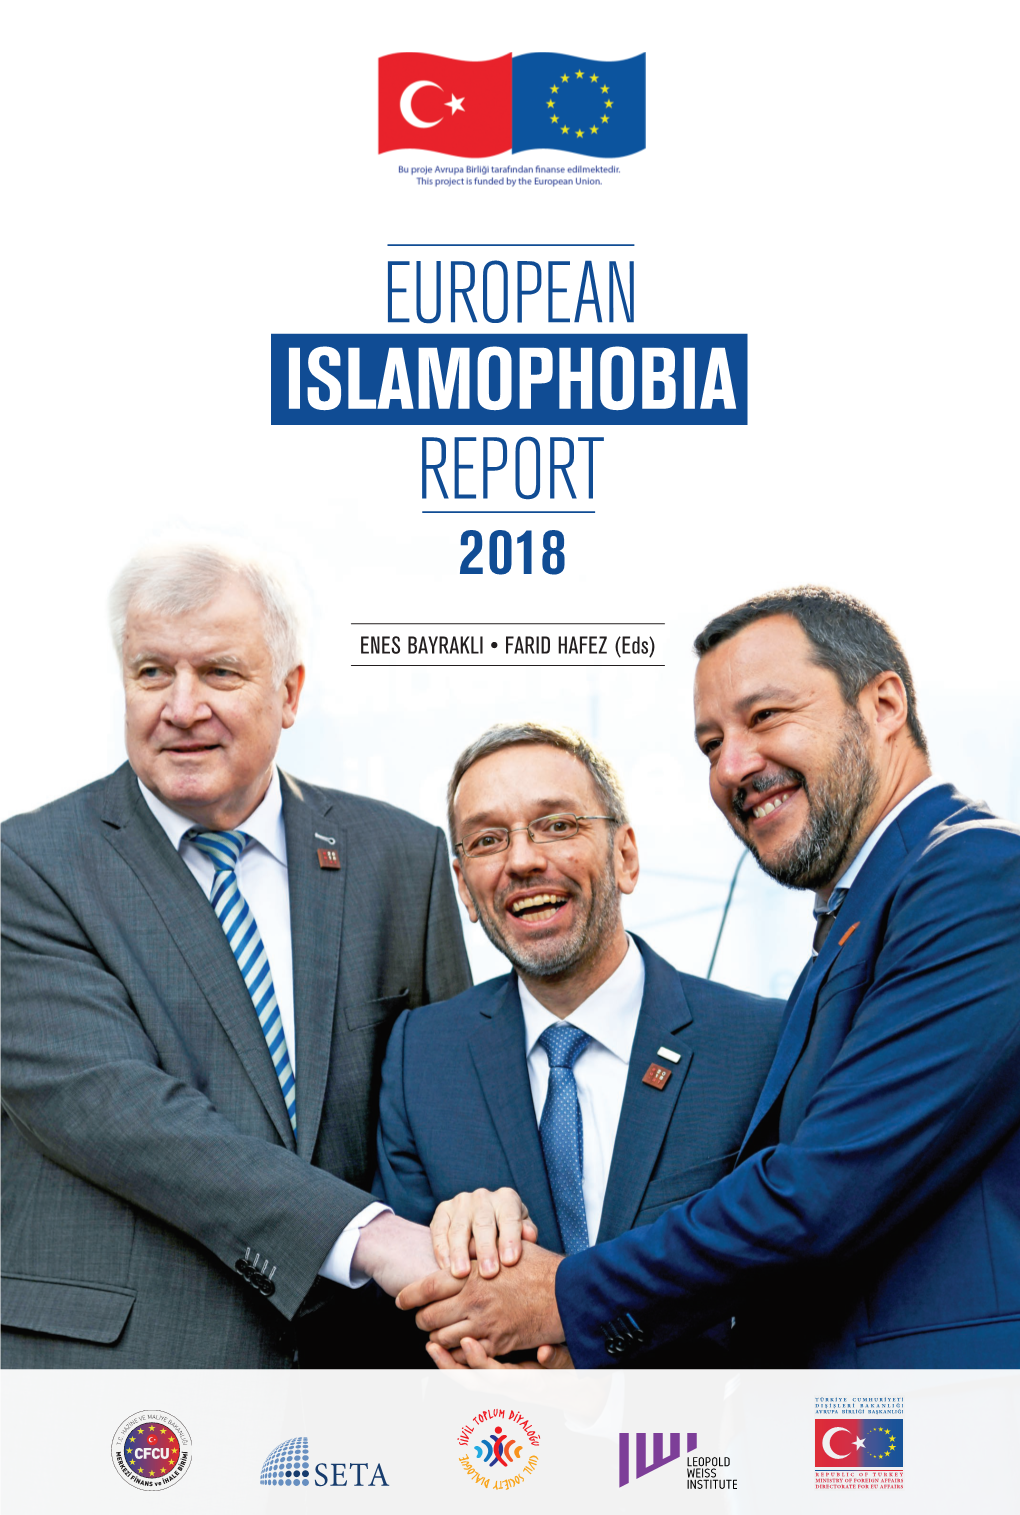 European Islamophobia Report Addresses a Still Timely and Politically Important Issue